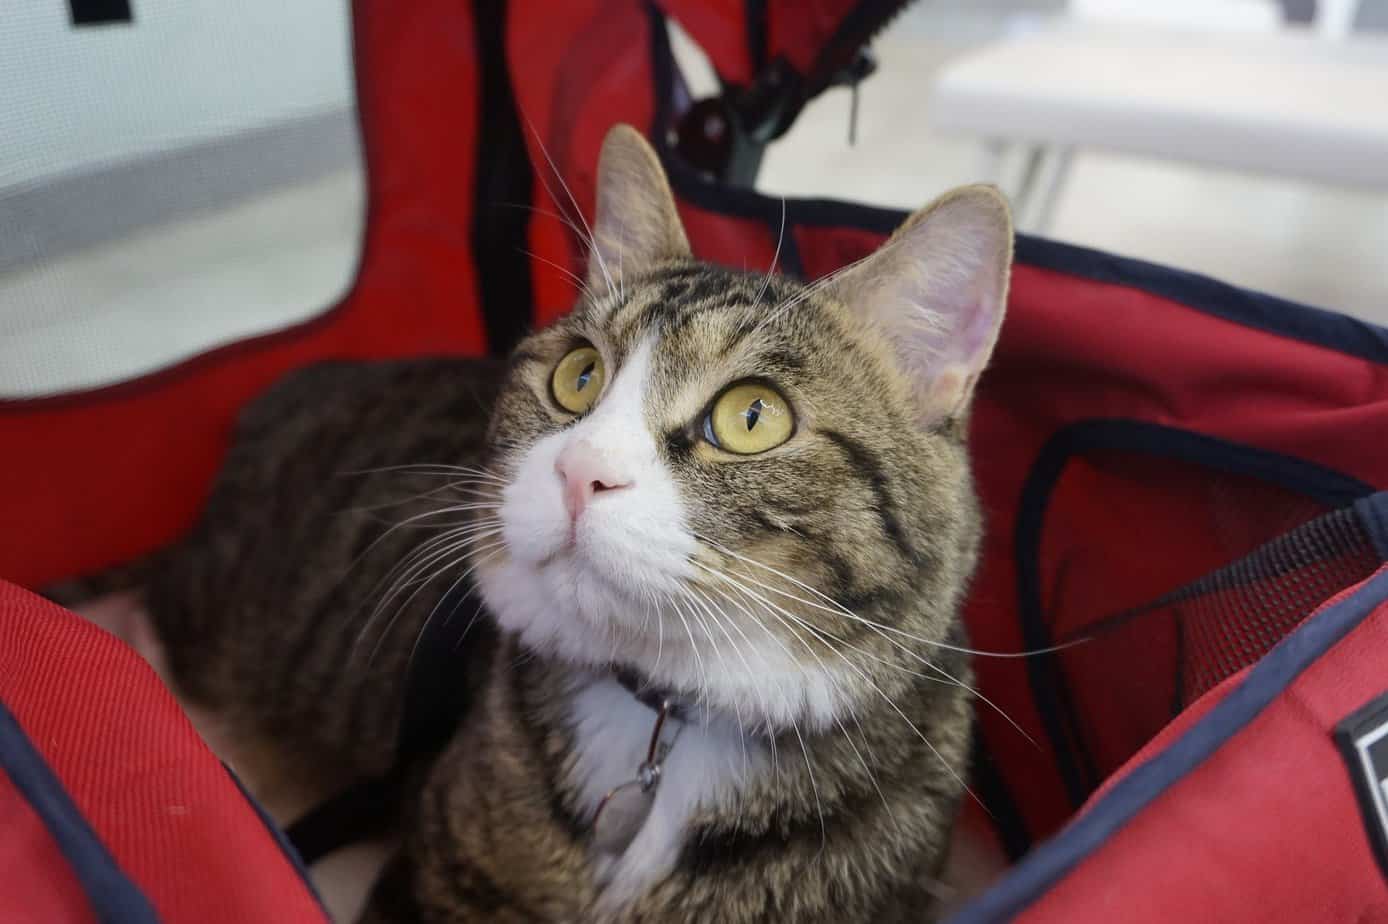 Do Cats Like Going For Walks In Strollers?